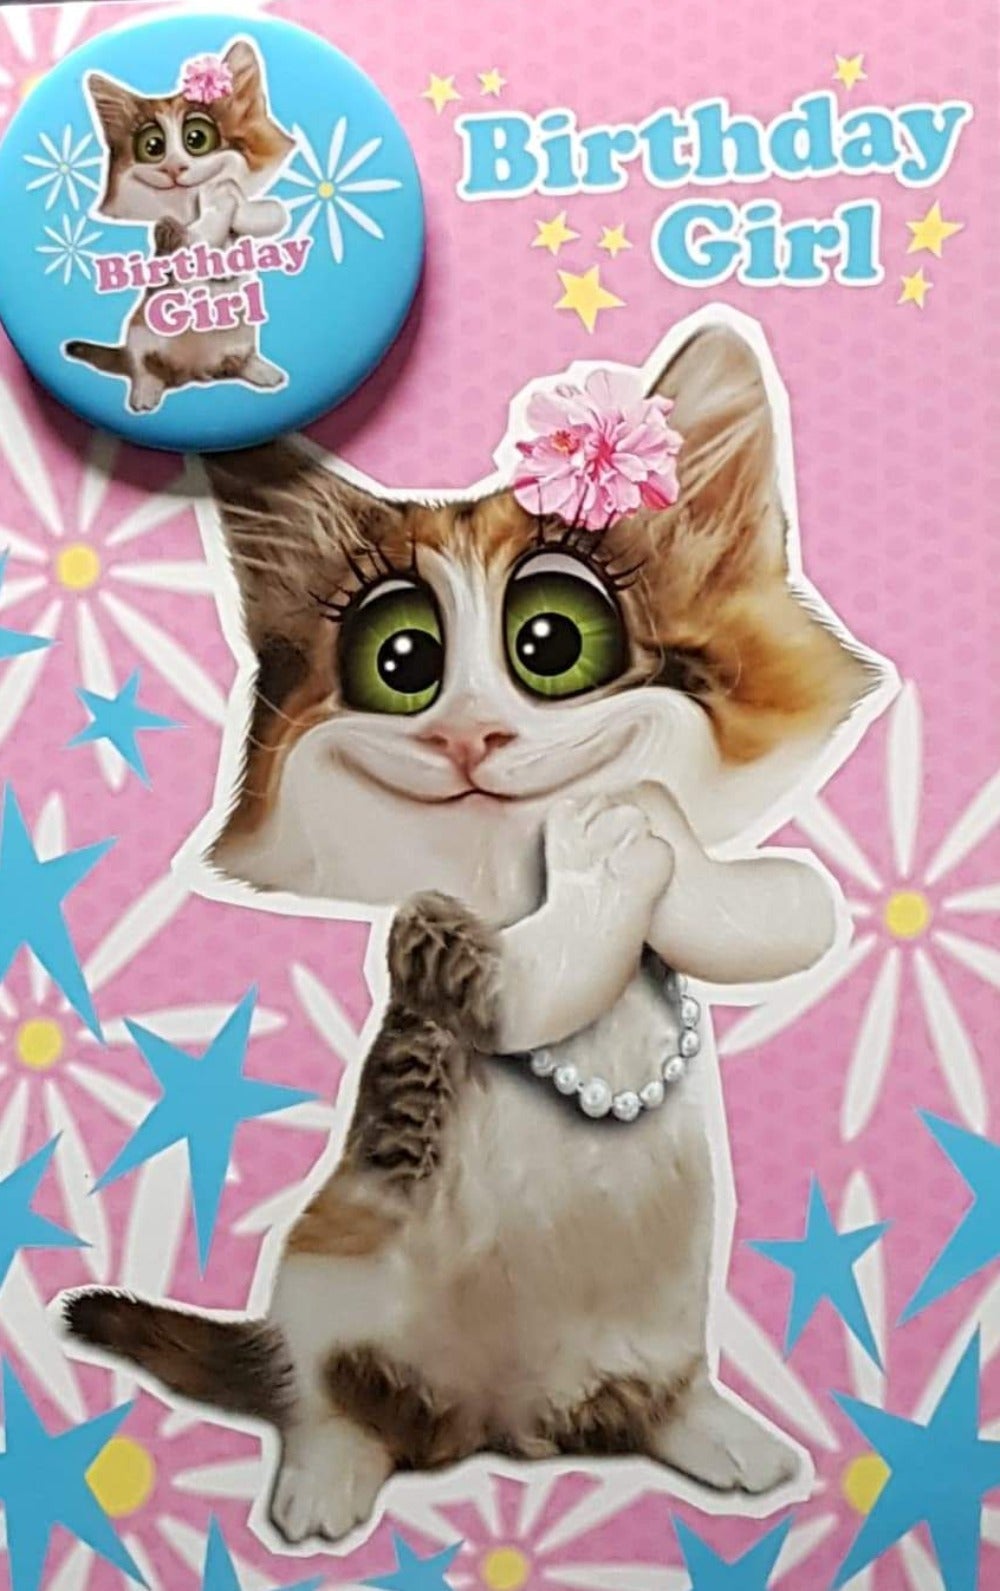 Birthday Card - Girl / A Cat With A Flower